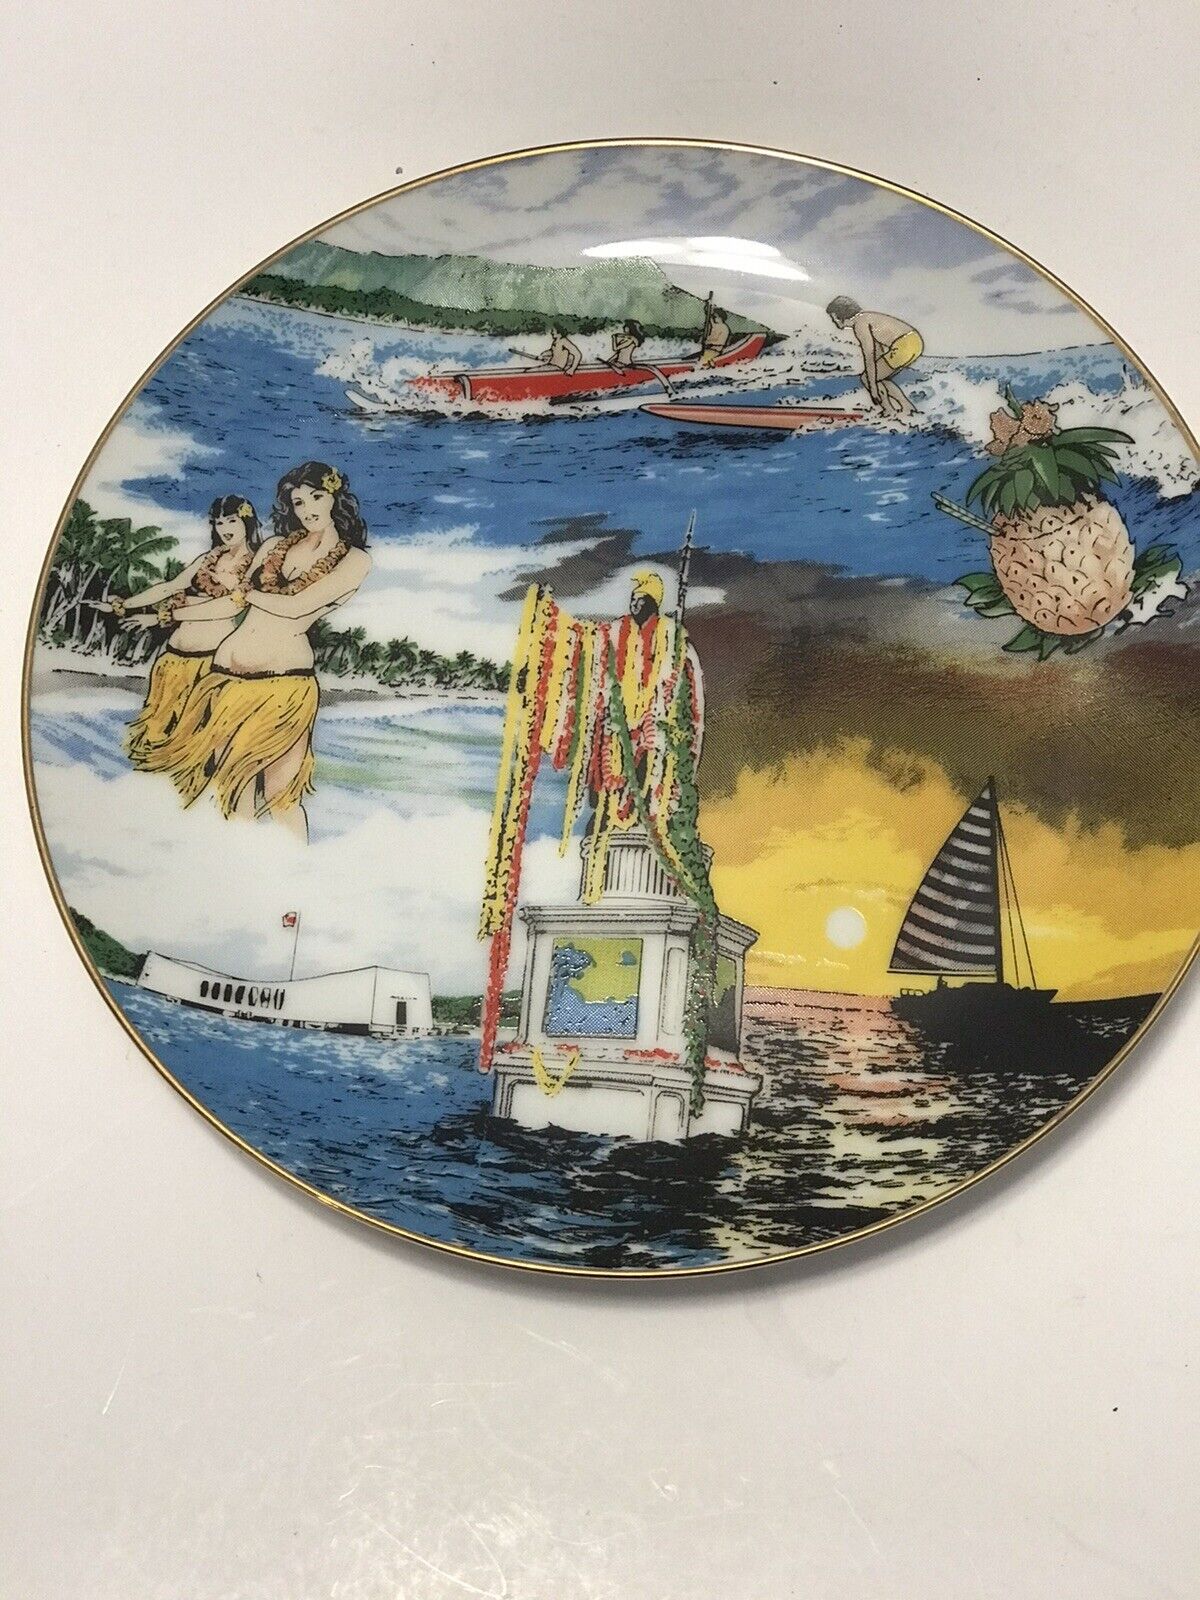 Hawaiin Souvenir / Advertising Plate White Rodgers Emerson - FANTASTIC FOR AGE